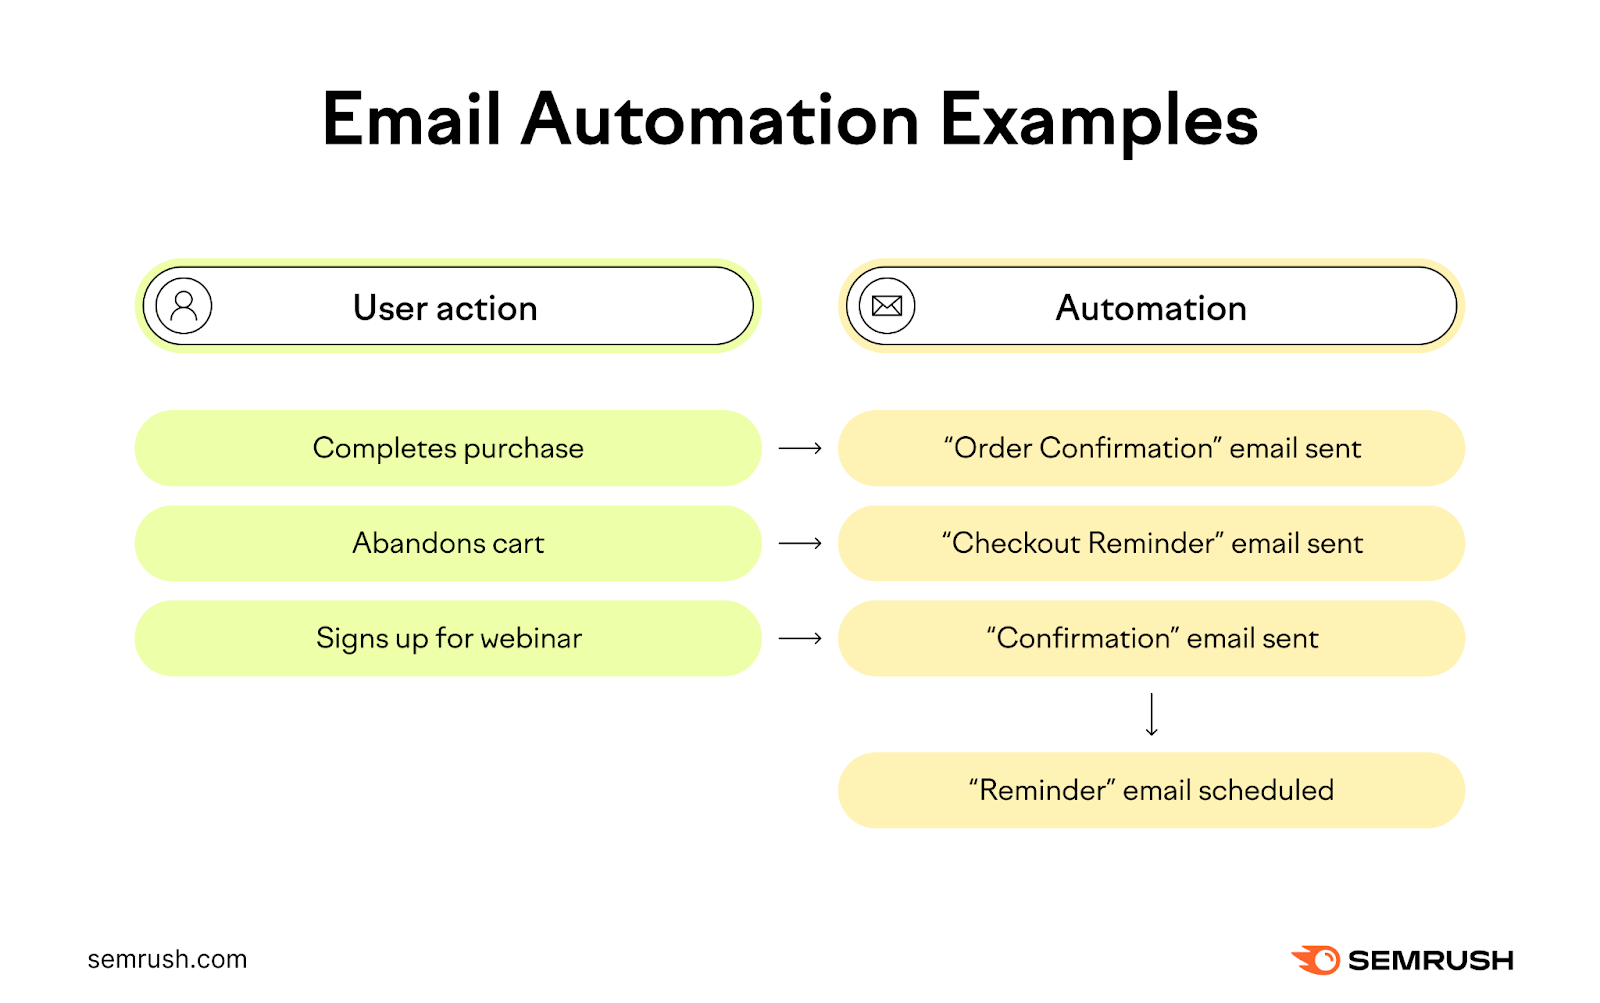 Email automation examples include the user action of completing a purchase then an order confirmation email is sent, or the user abandons cart then a checkout reminder email is sent.